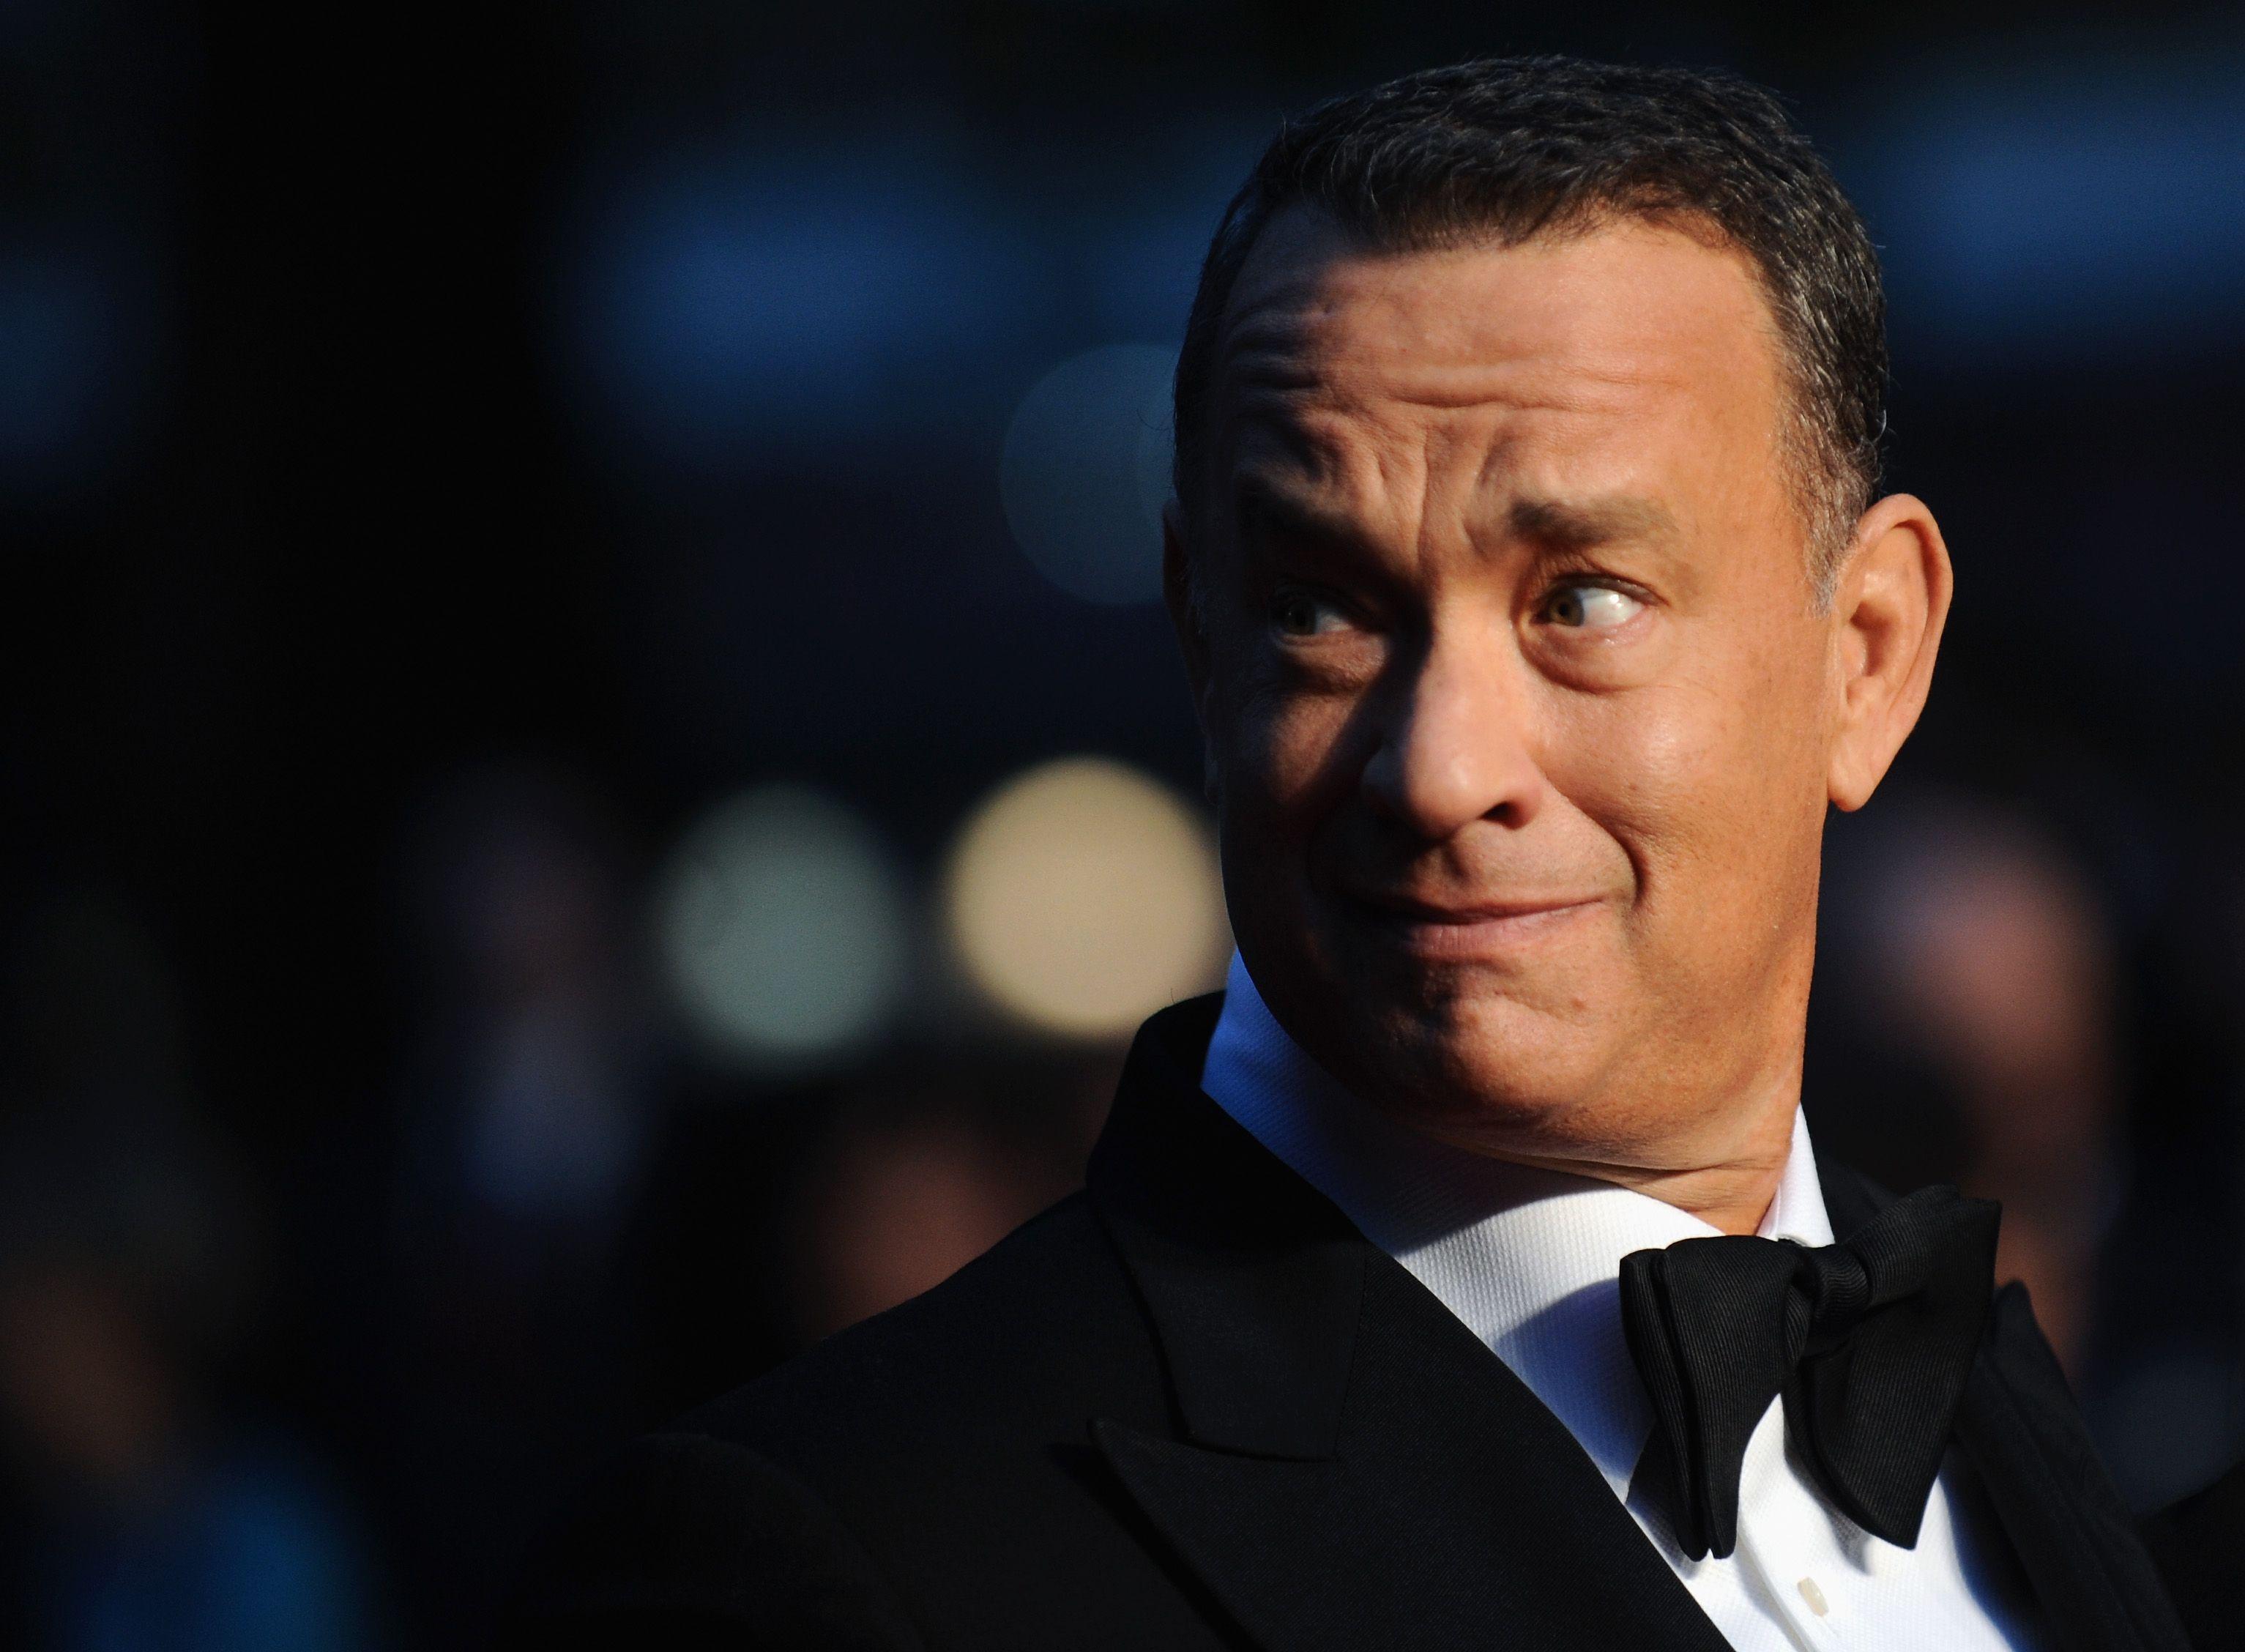 Tom Hanks Wants to Play a Superhero, So Here Are Some Options